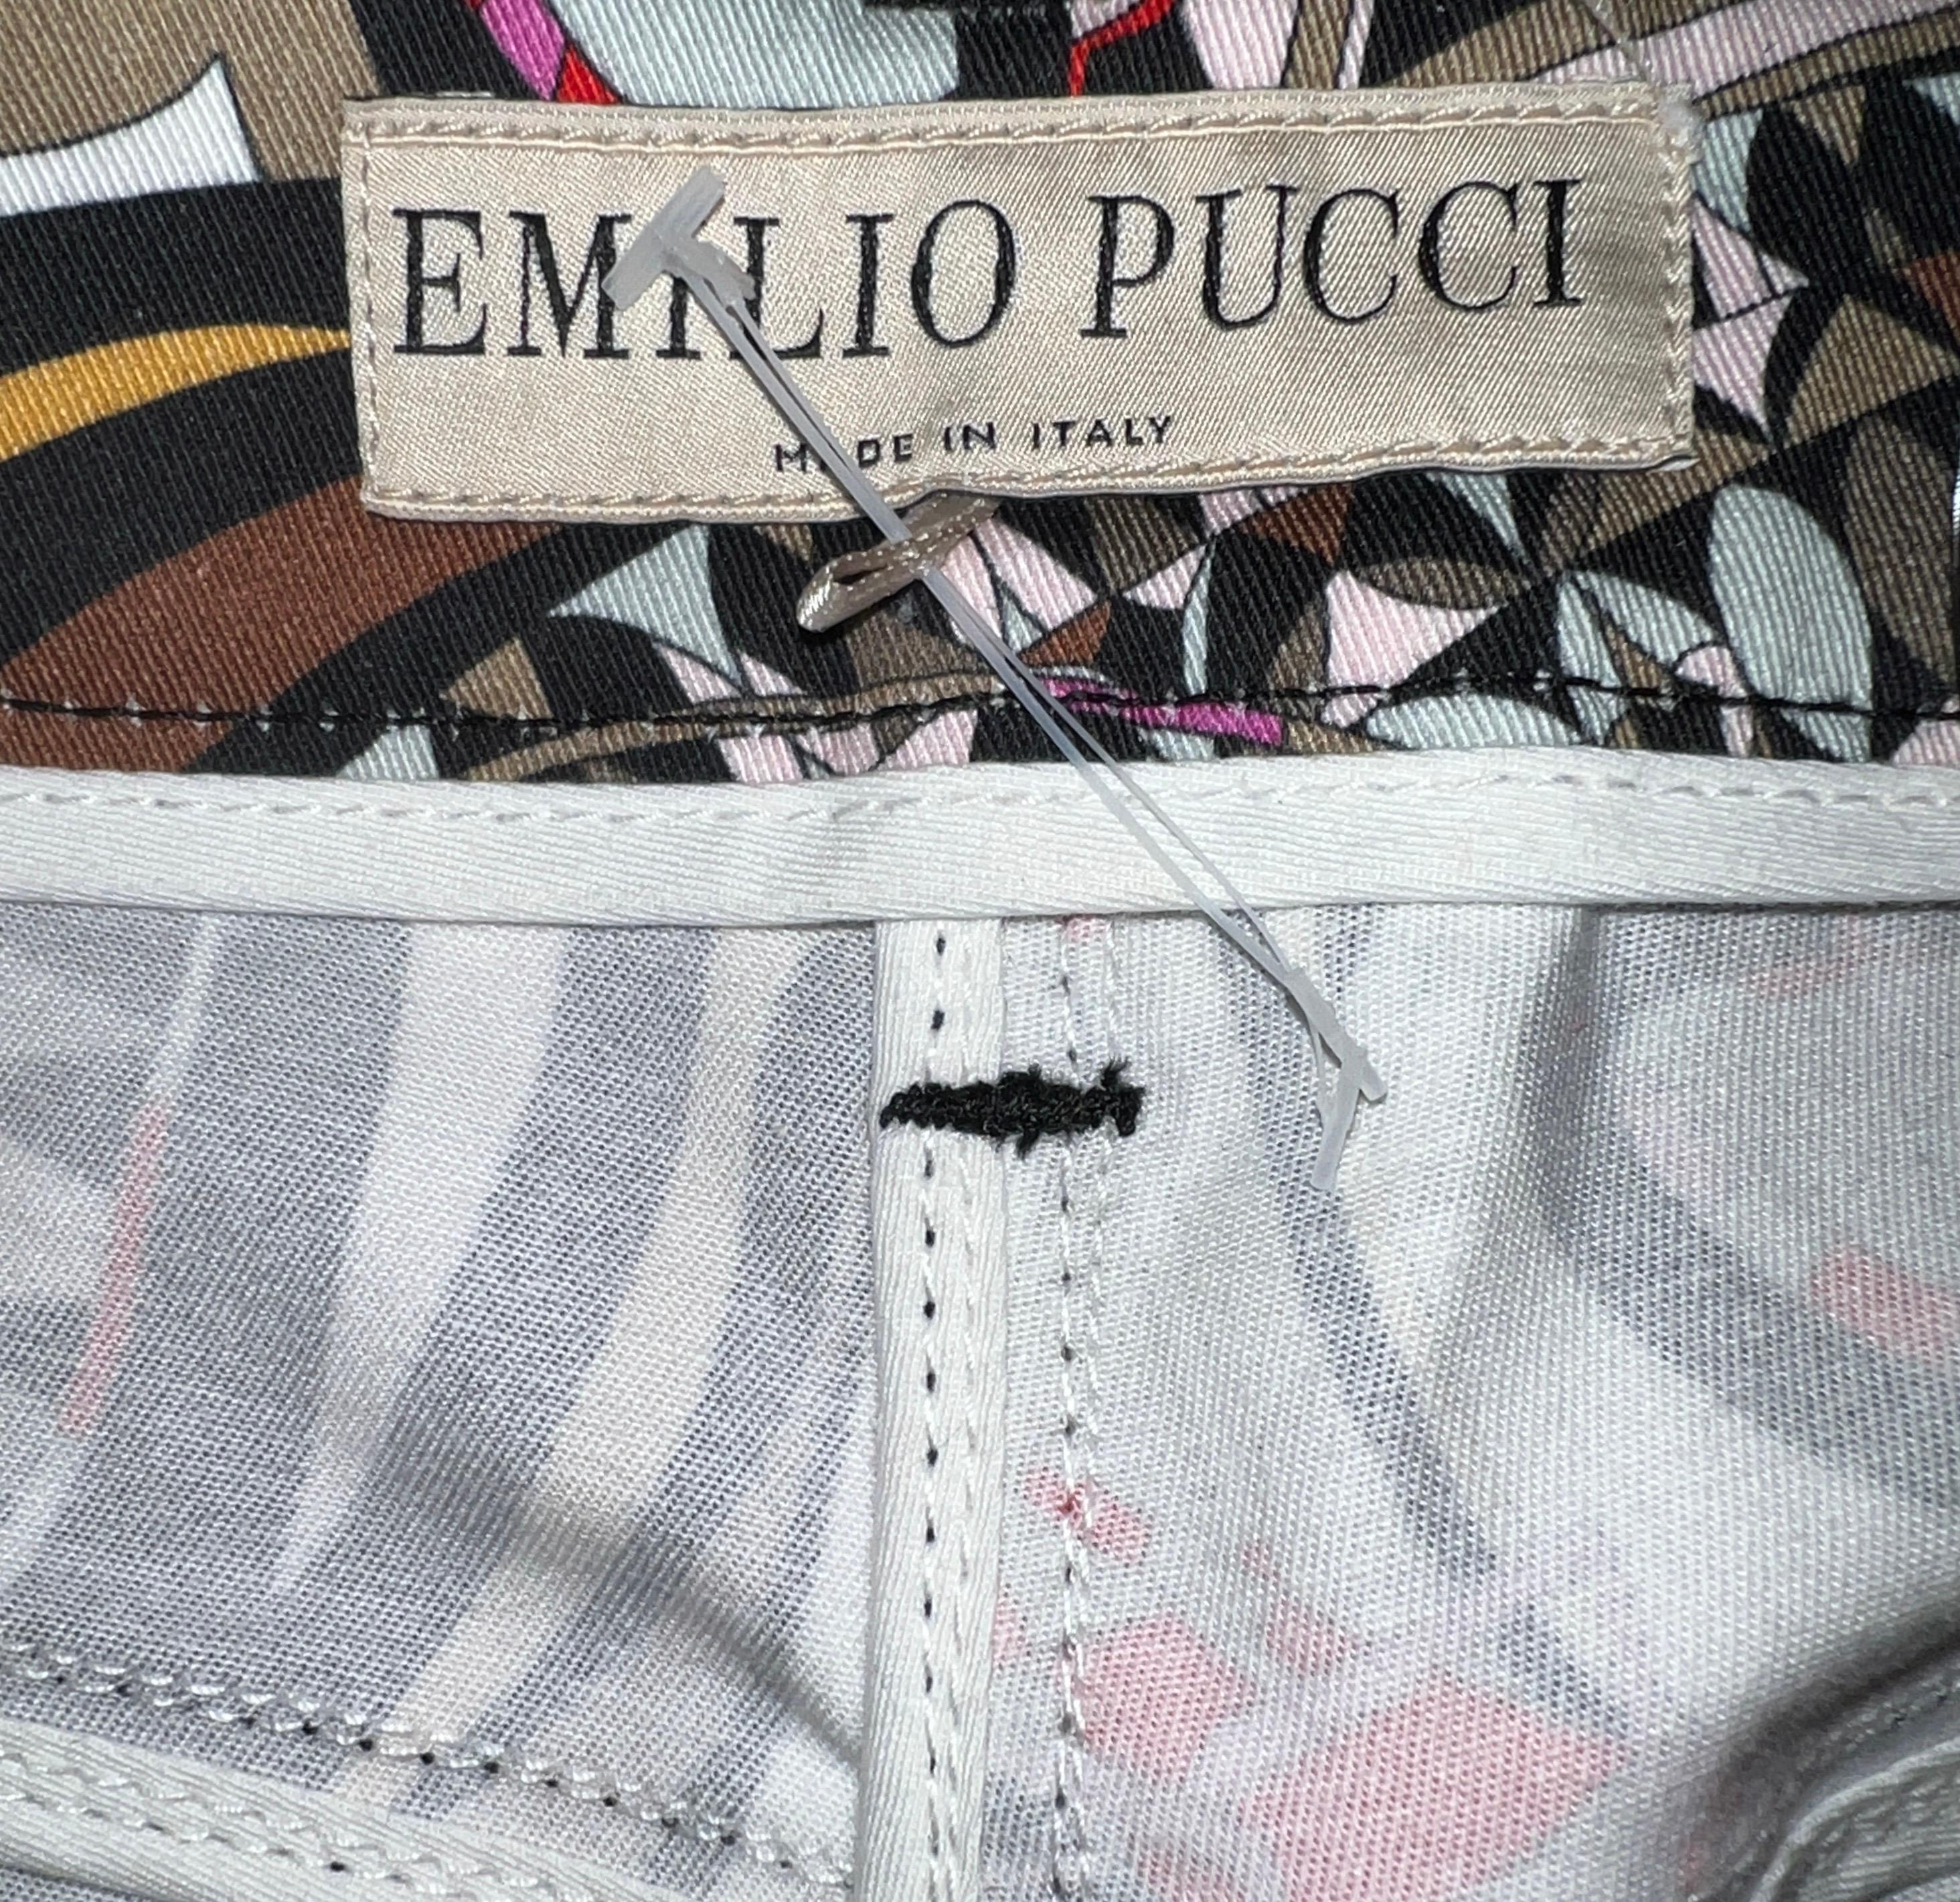 NEW Emilio Pucci Tropical Signature Floral Animal Print Hot Shorts Pants 42 For Sale 1